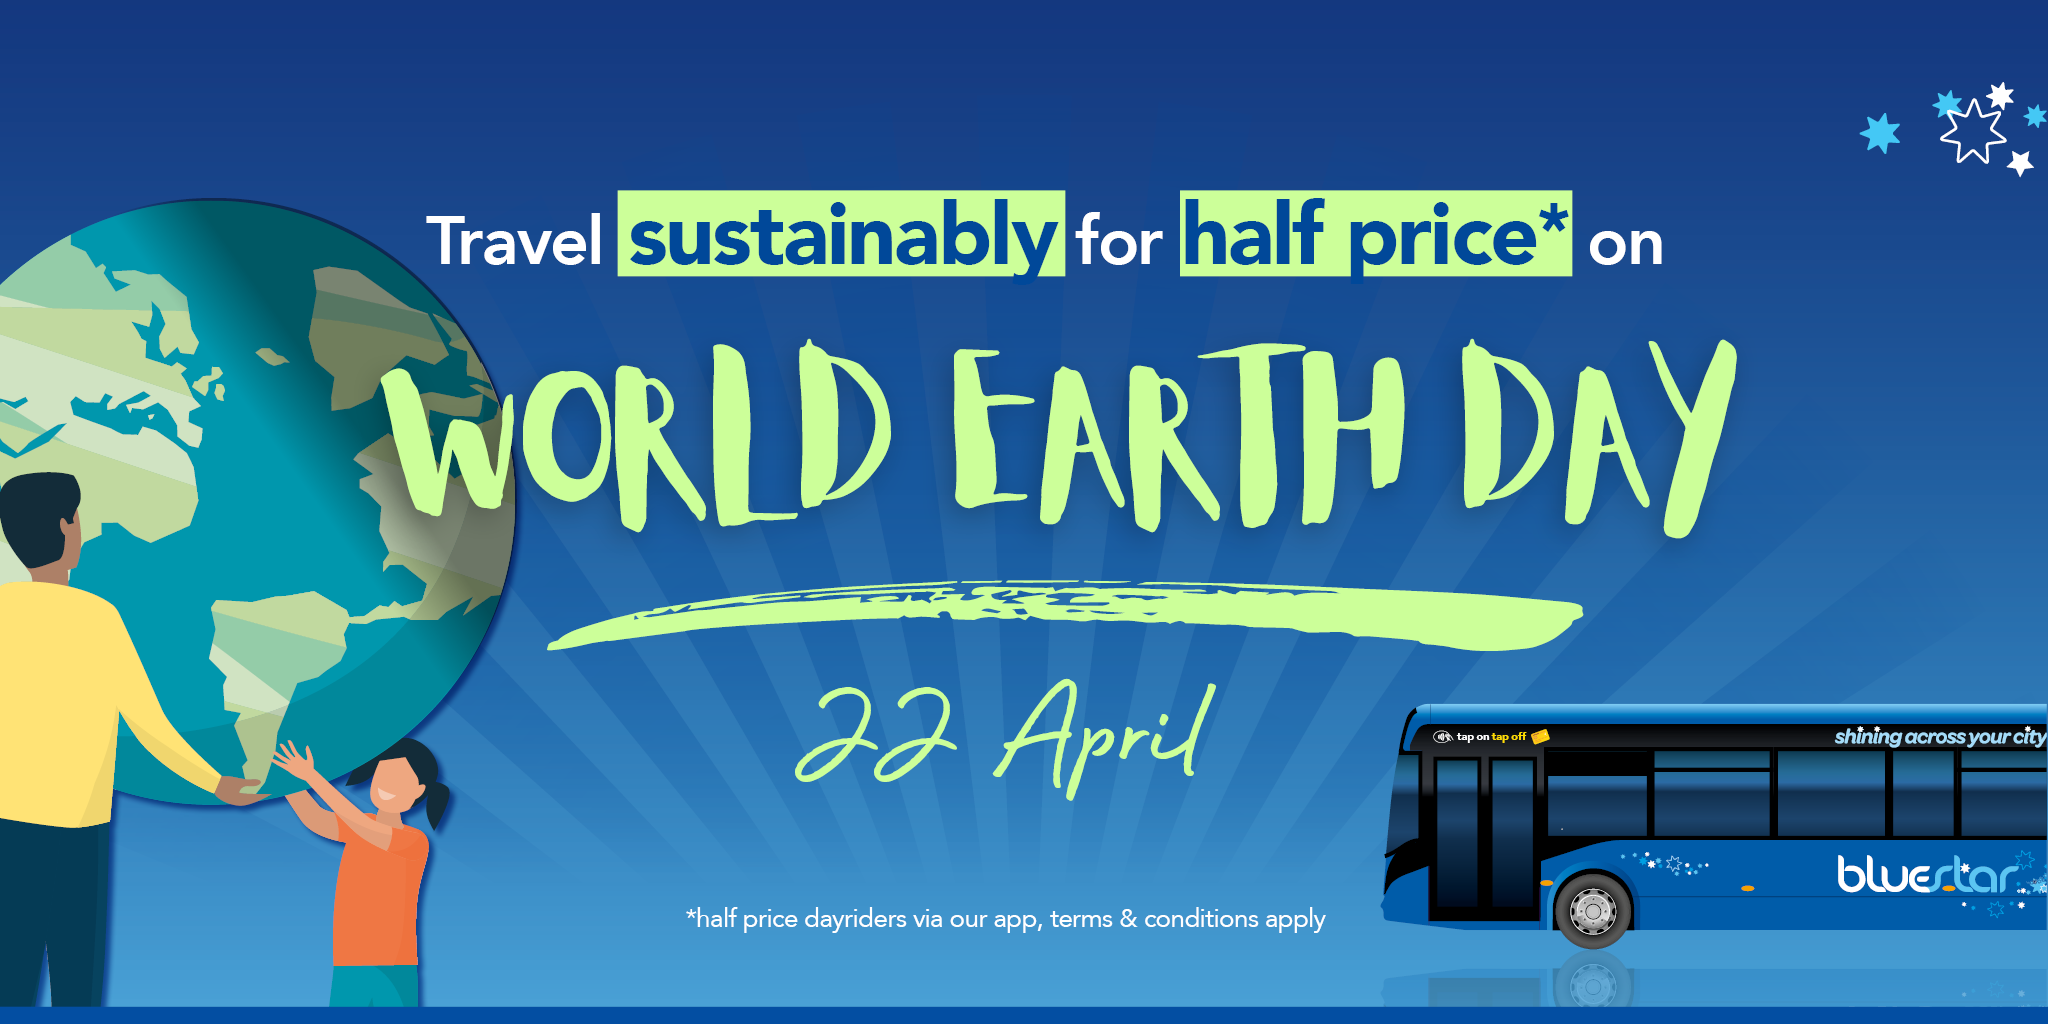 travel sustainably for half price on world earth day - 22 april